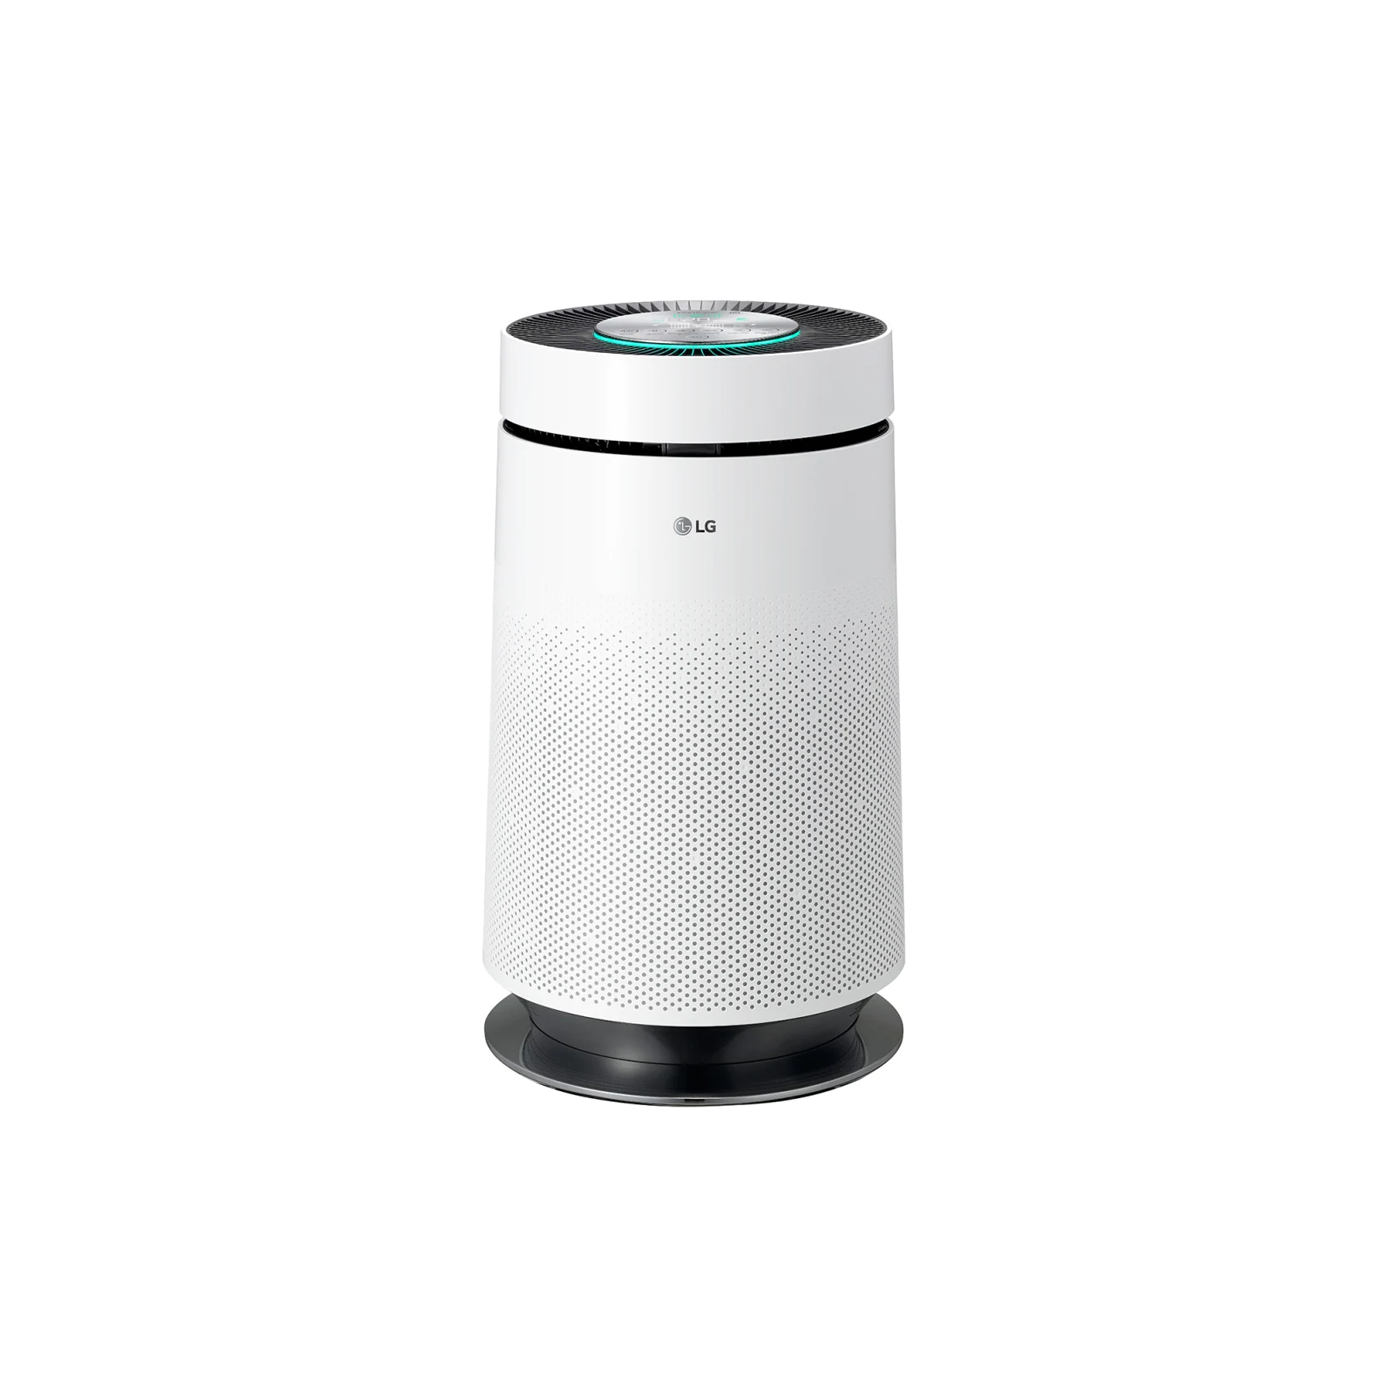 LG-360°-purification-with-6-step-filtration-PM-1.0-Sensor-&-Wi-Fi-enabled